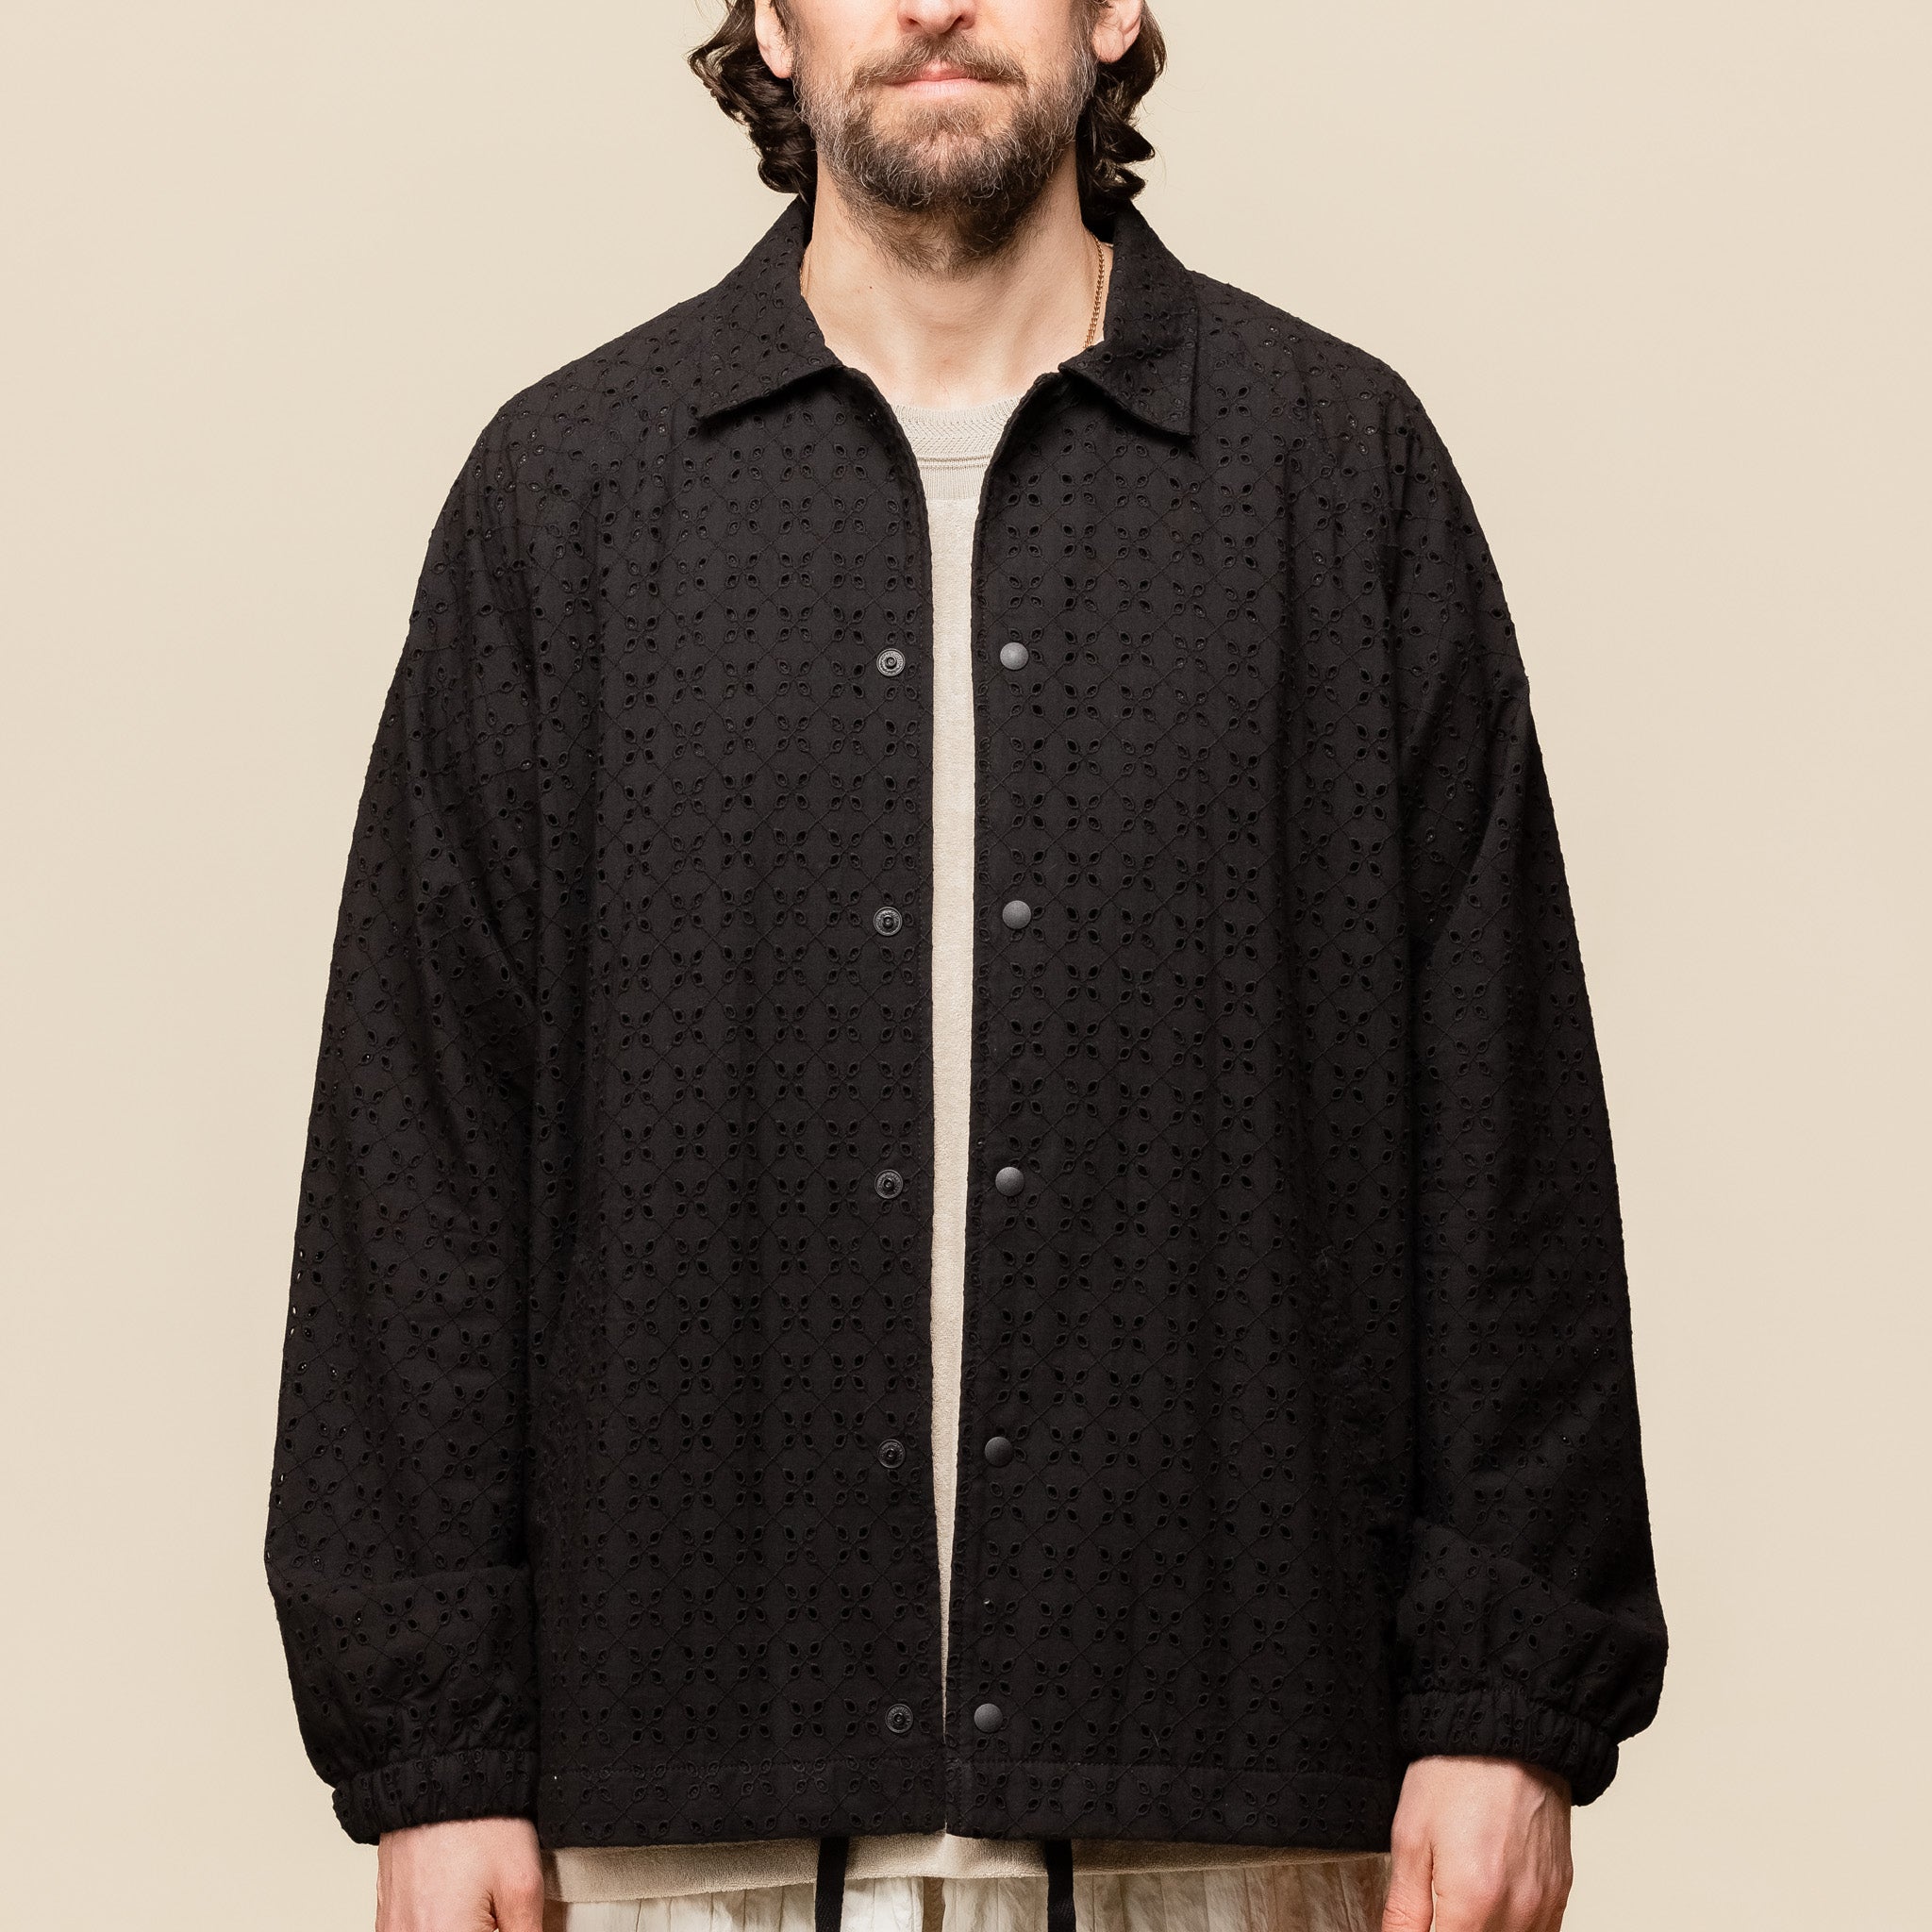 Merely Made - Premium Flower Lace Coach Jacket - Black "merely made website" "merely made stockists"